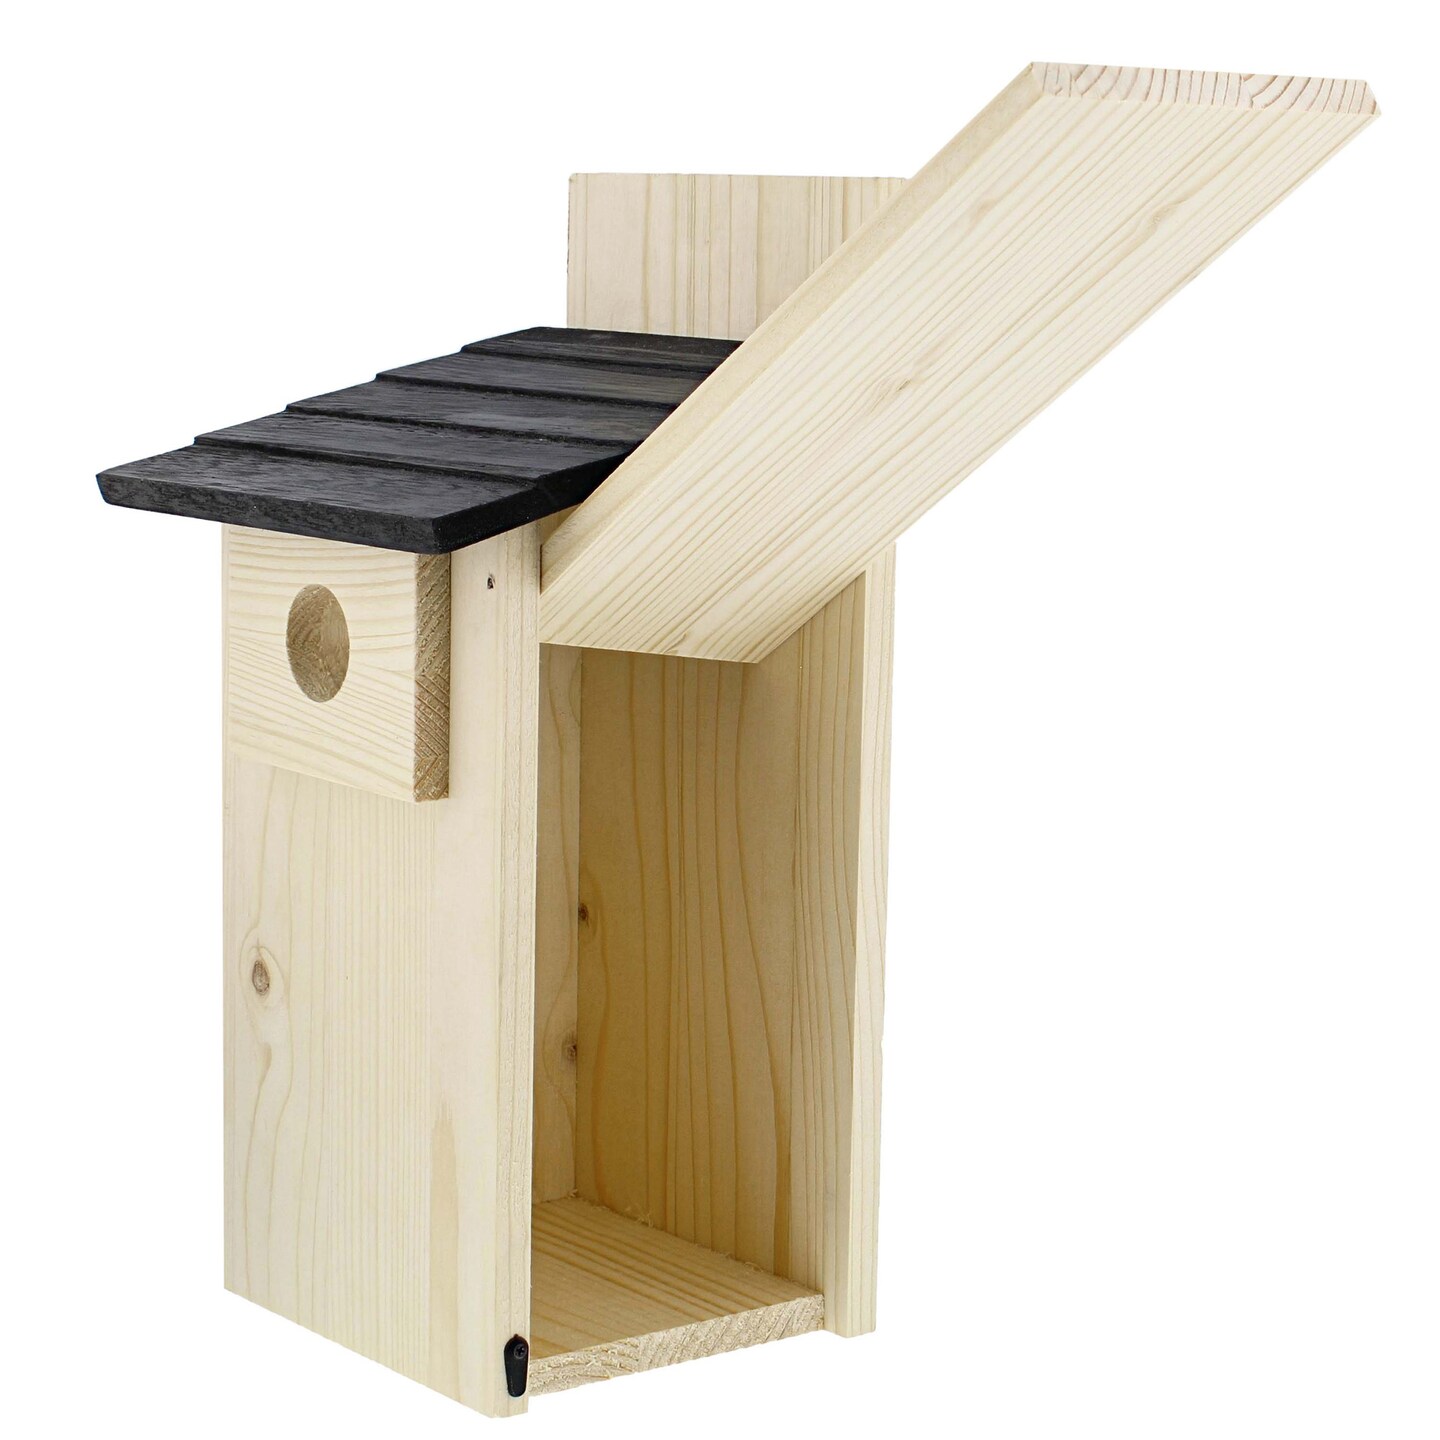 MiMu Wooden Bird House to Paint - Unfinished Mounted Bird House